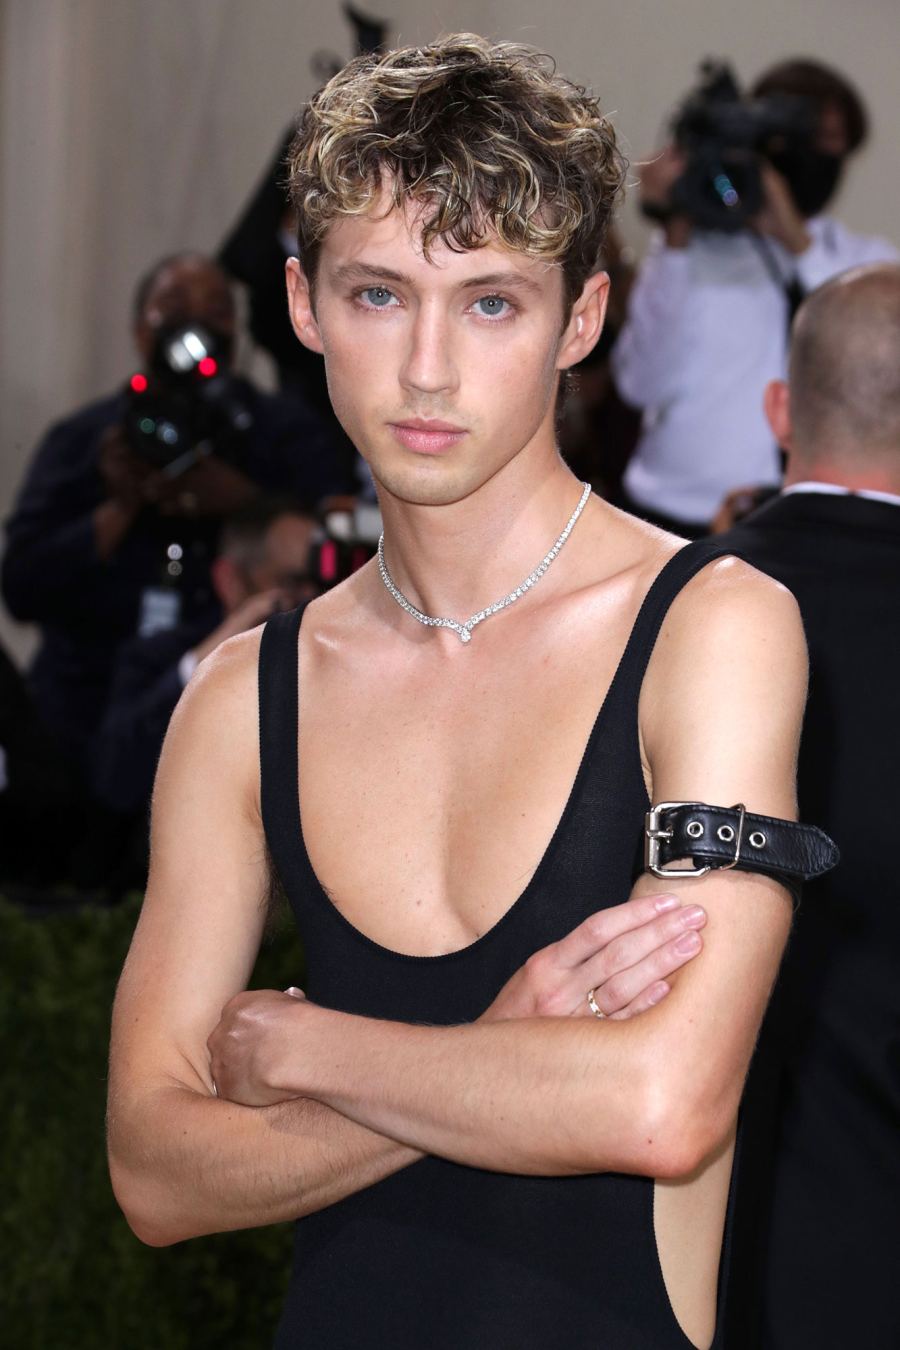 Troye Sivan Most Extravagant Celebrity Bling From the 2021 Met Gala